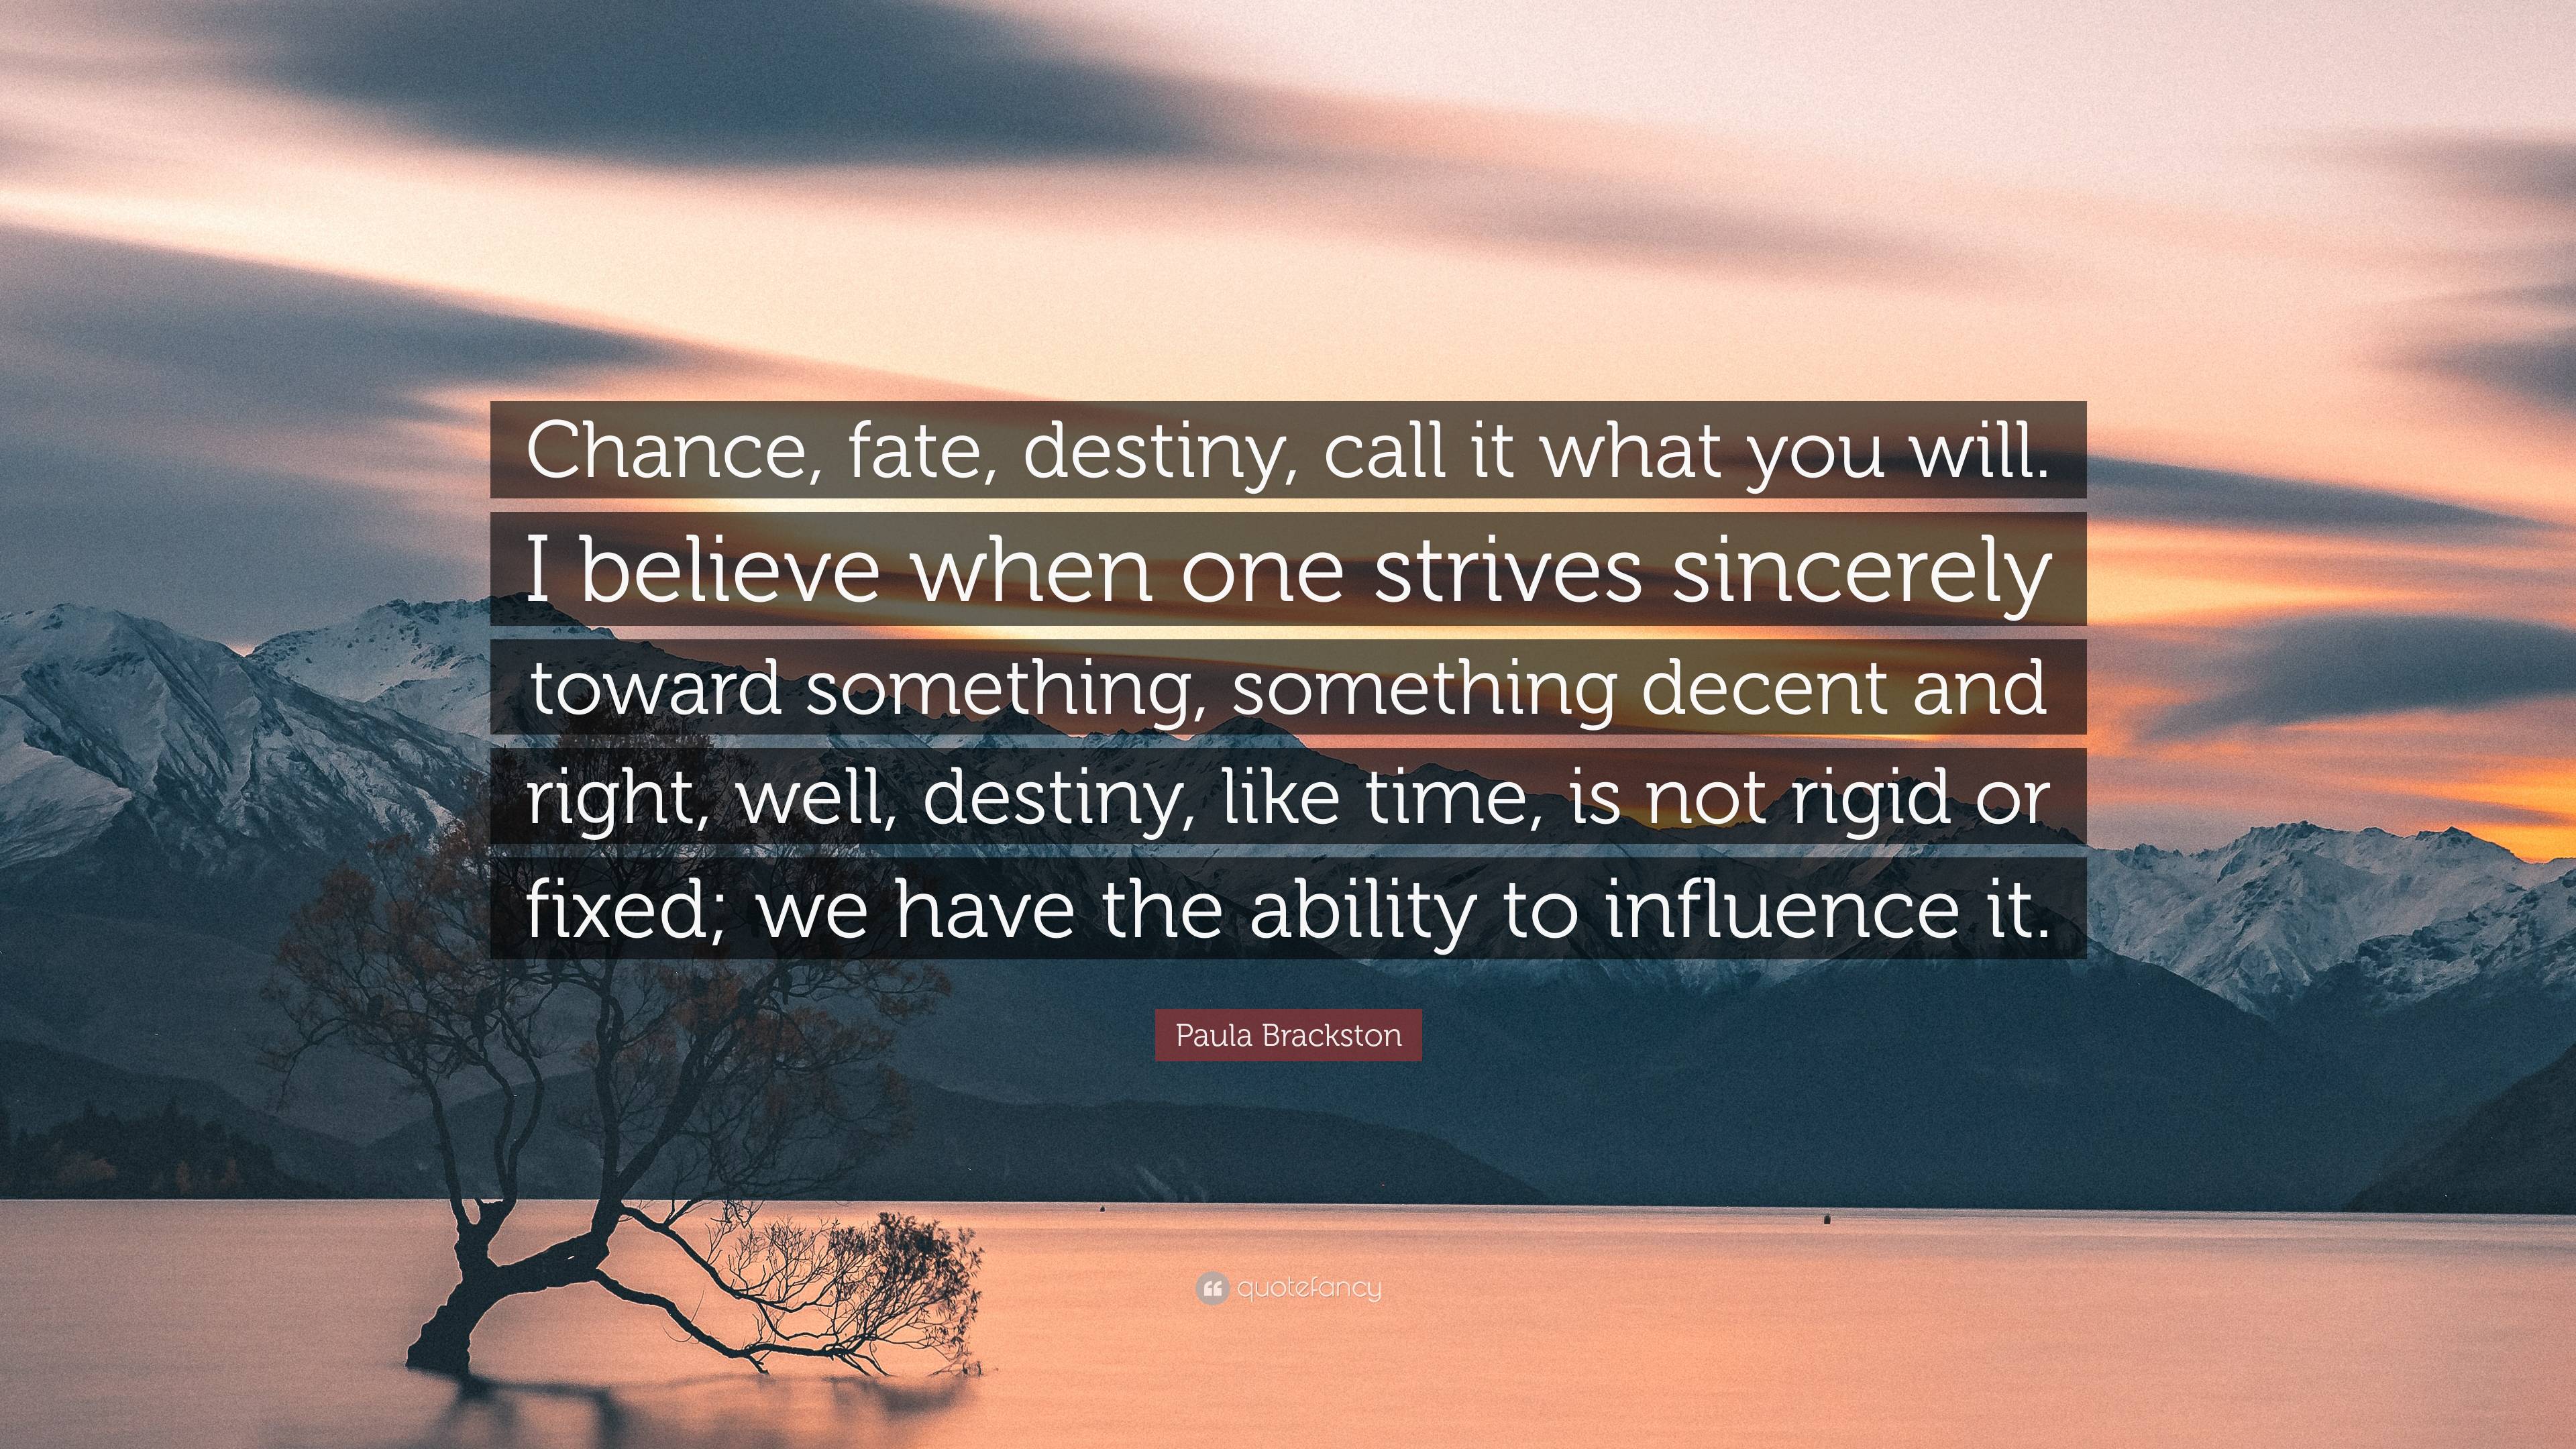 Paula Brackston Quote: “Chance, fate, destiny, call it what you will. I ...